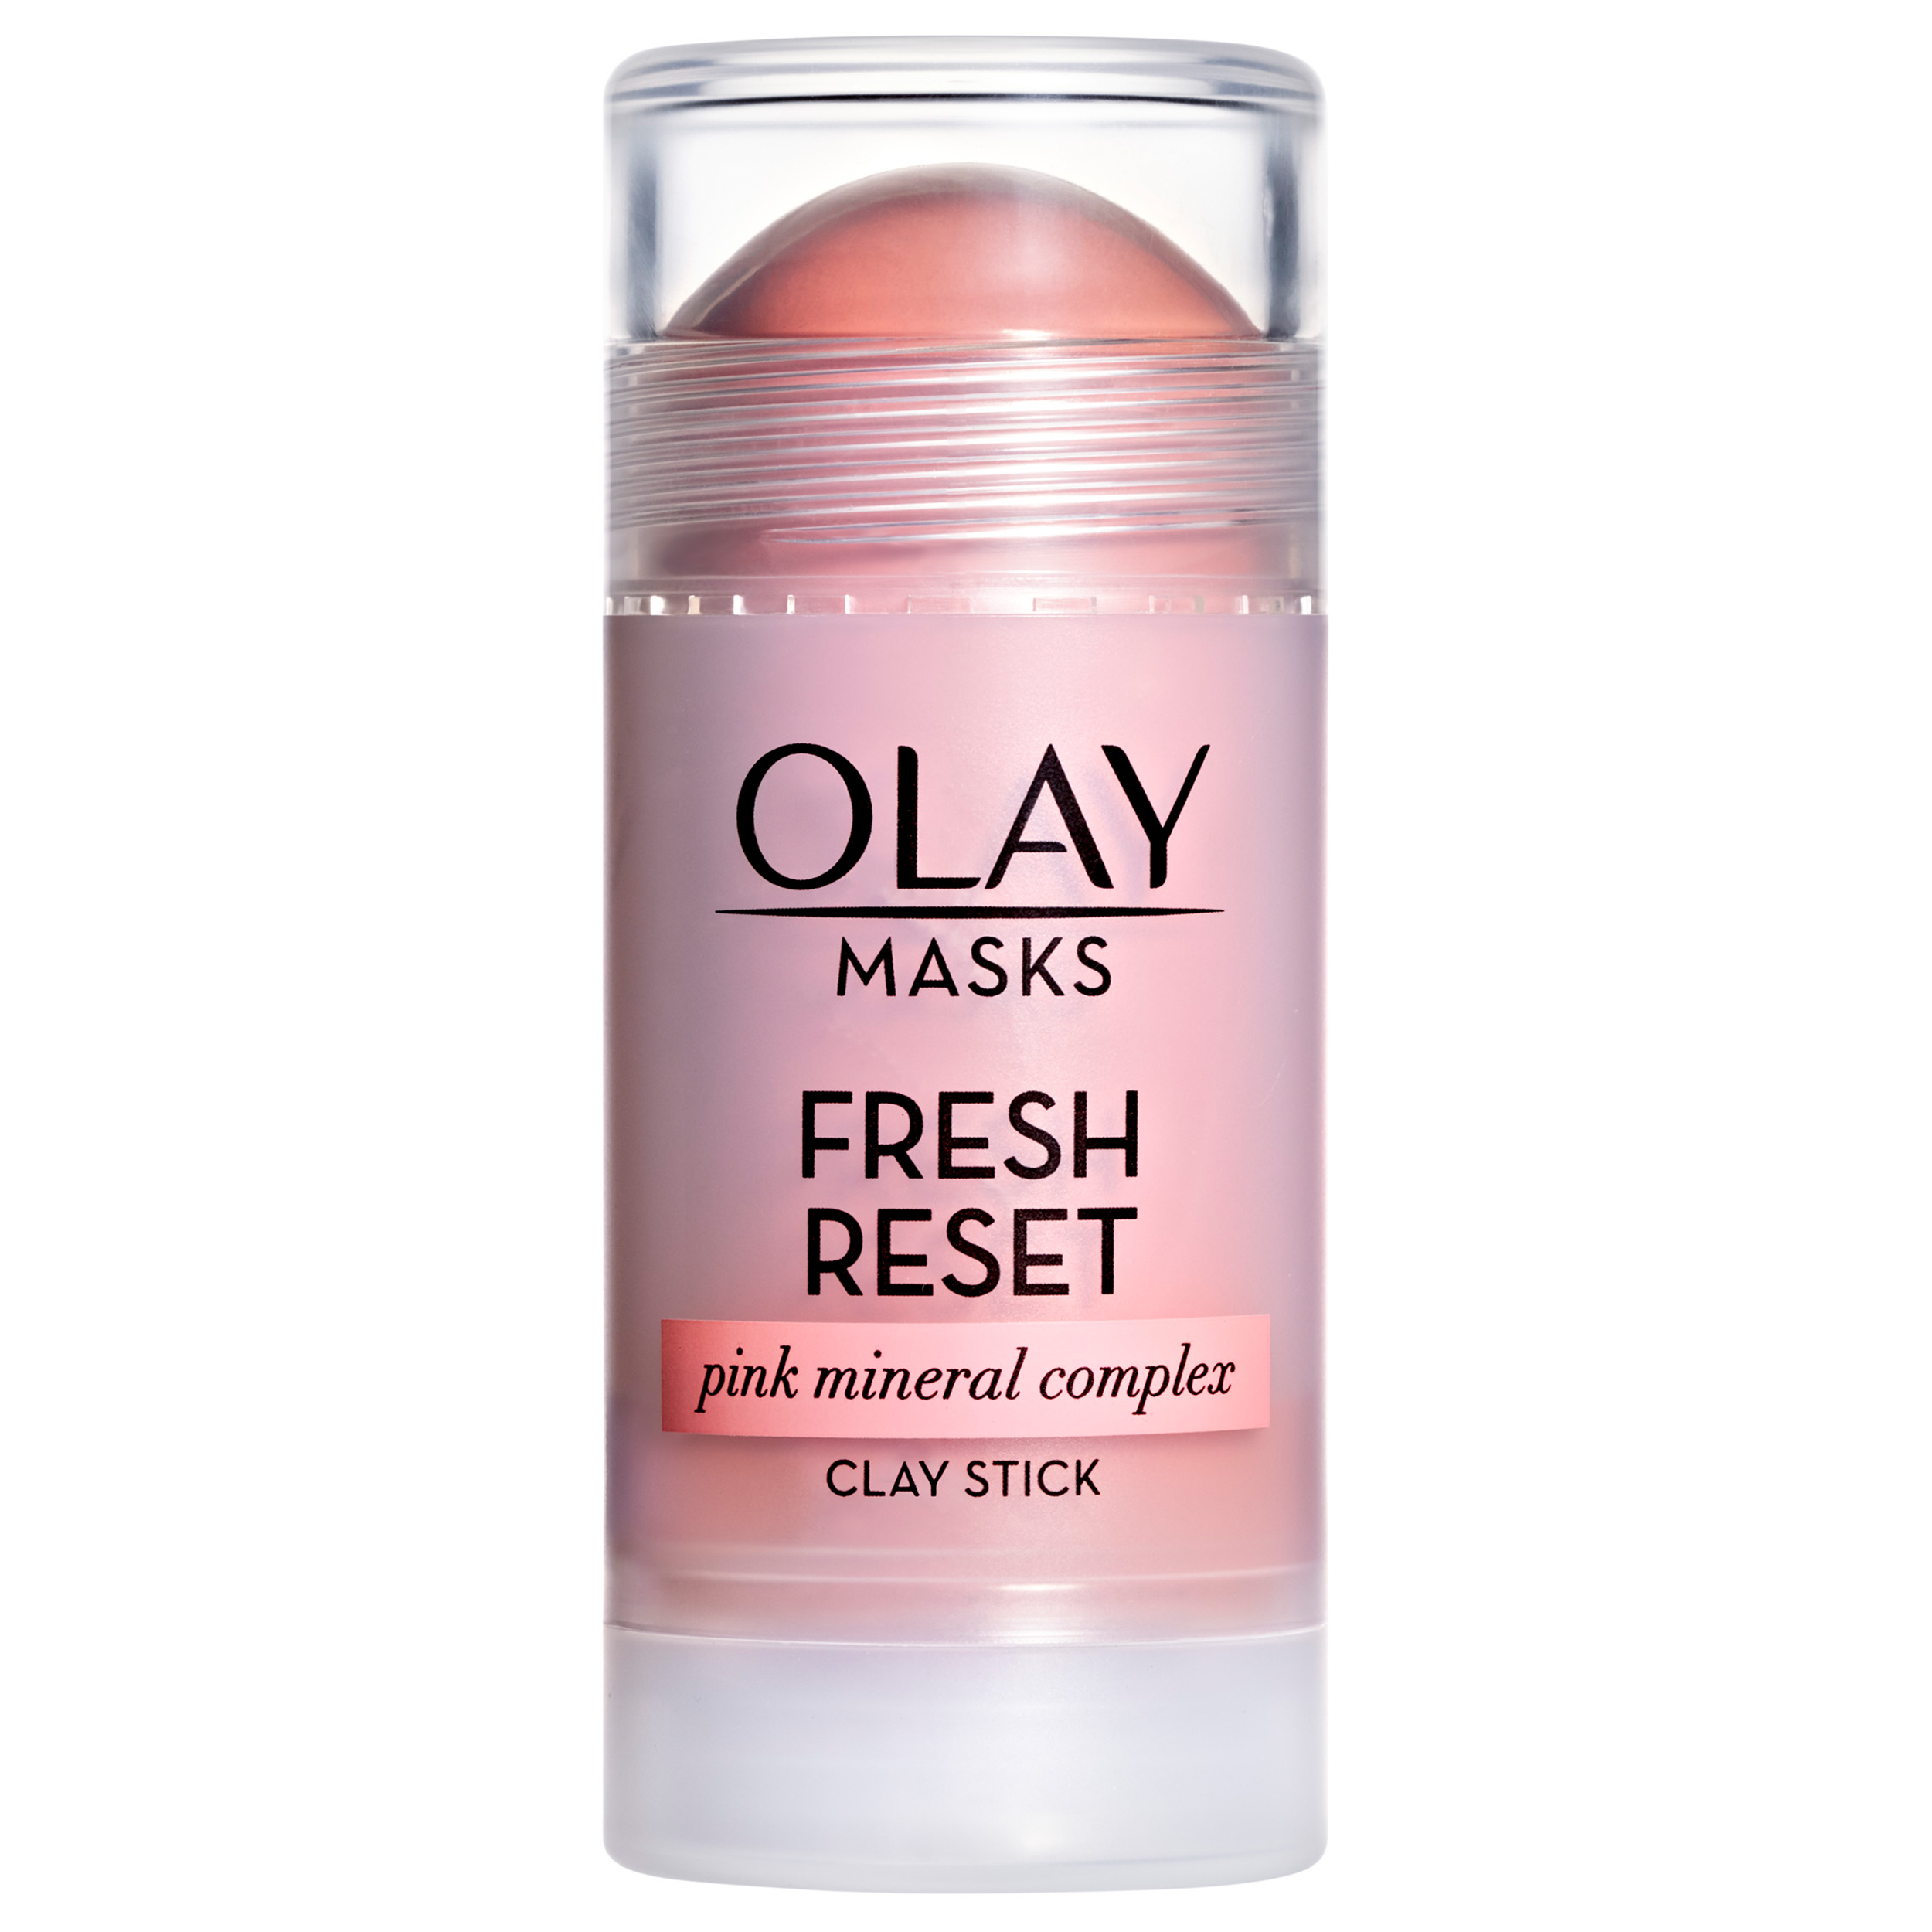 Olay Face Mask Stick, Fresh Reset, Pink Mineral Clay Complex, 1.7 oz - image 1 of 12